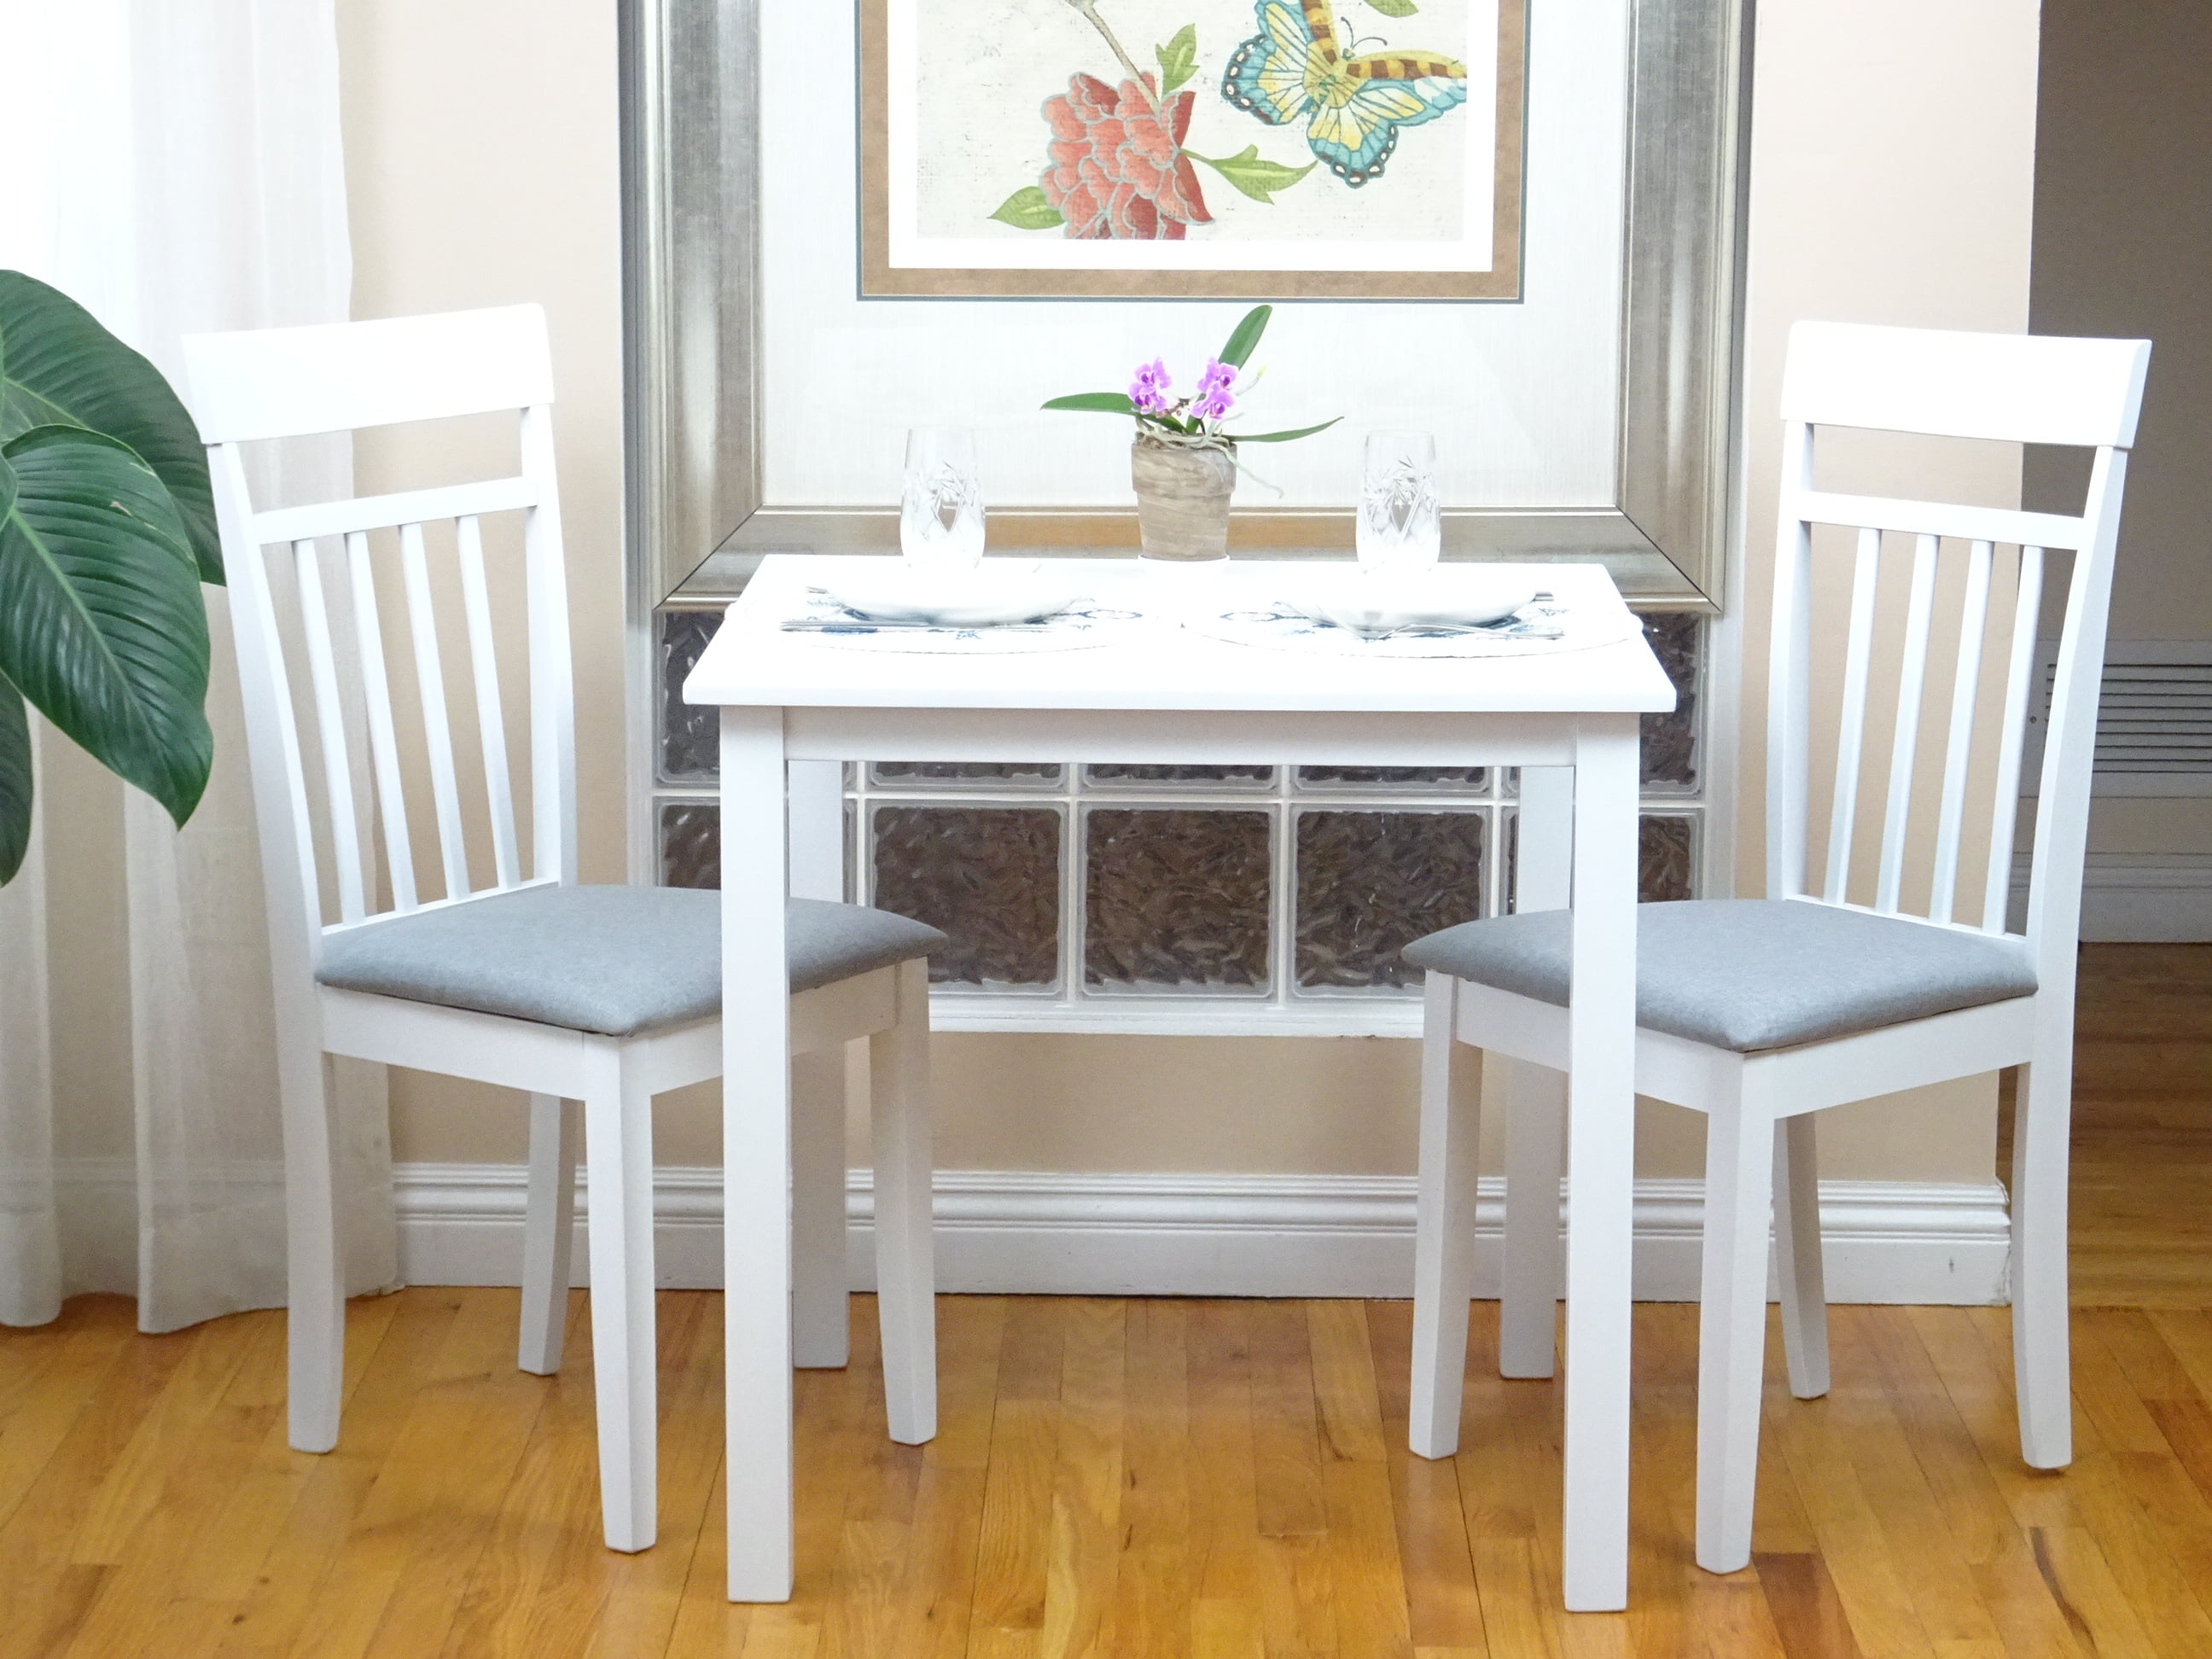  kitchen table and chairs set